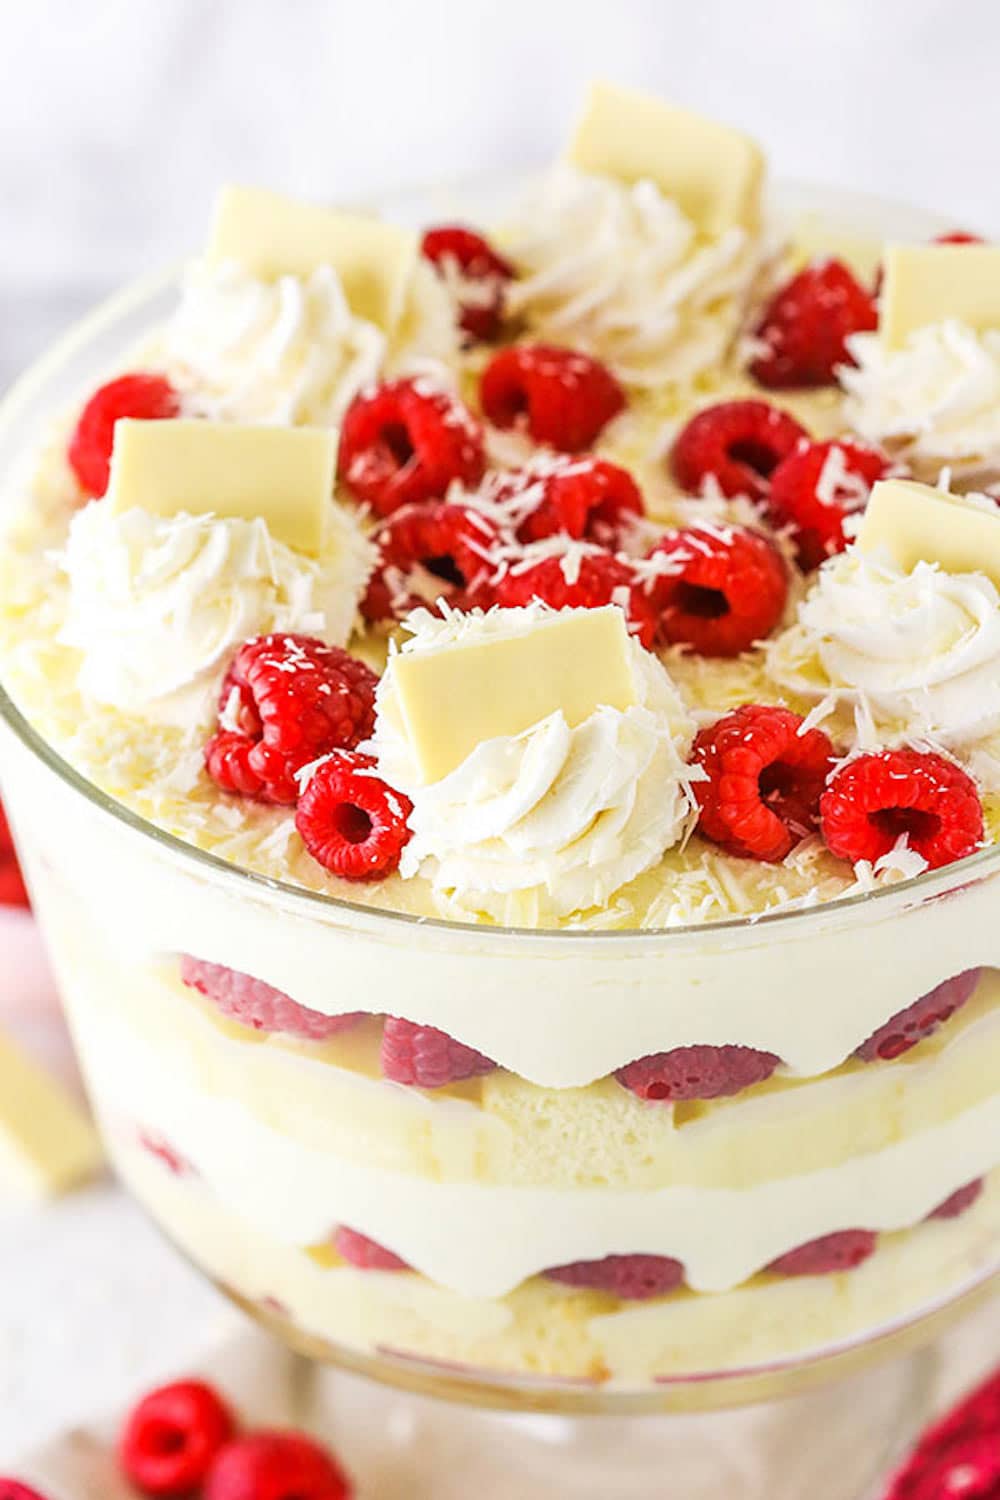 A Three-Layer White Chocolate Raspberry Trifle with Chocolate Shavings on Top.